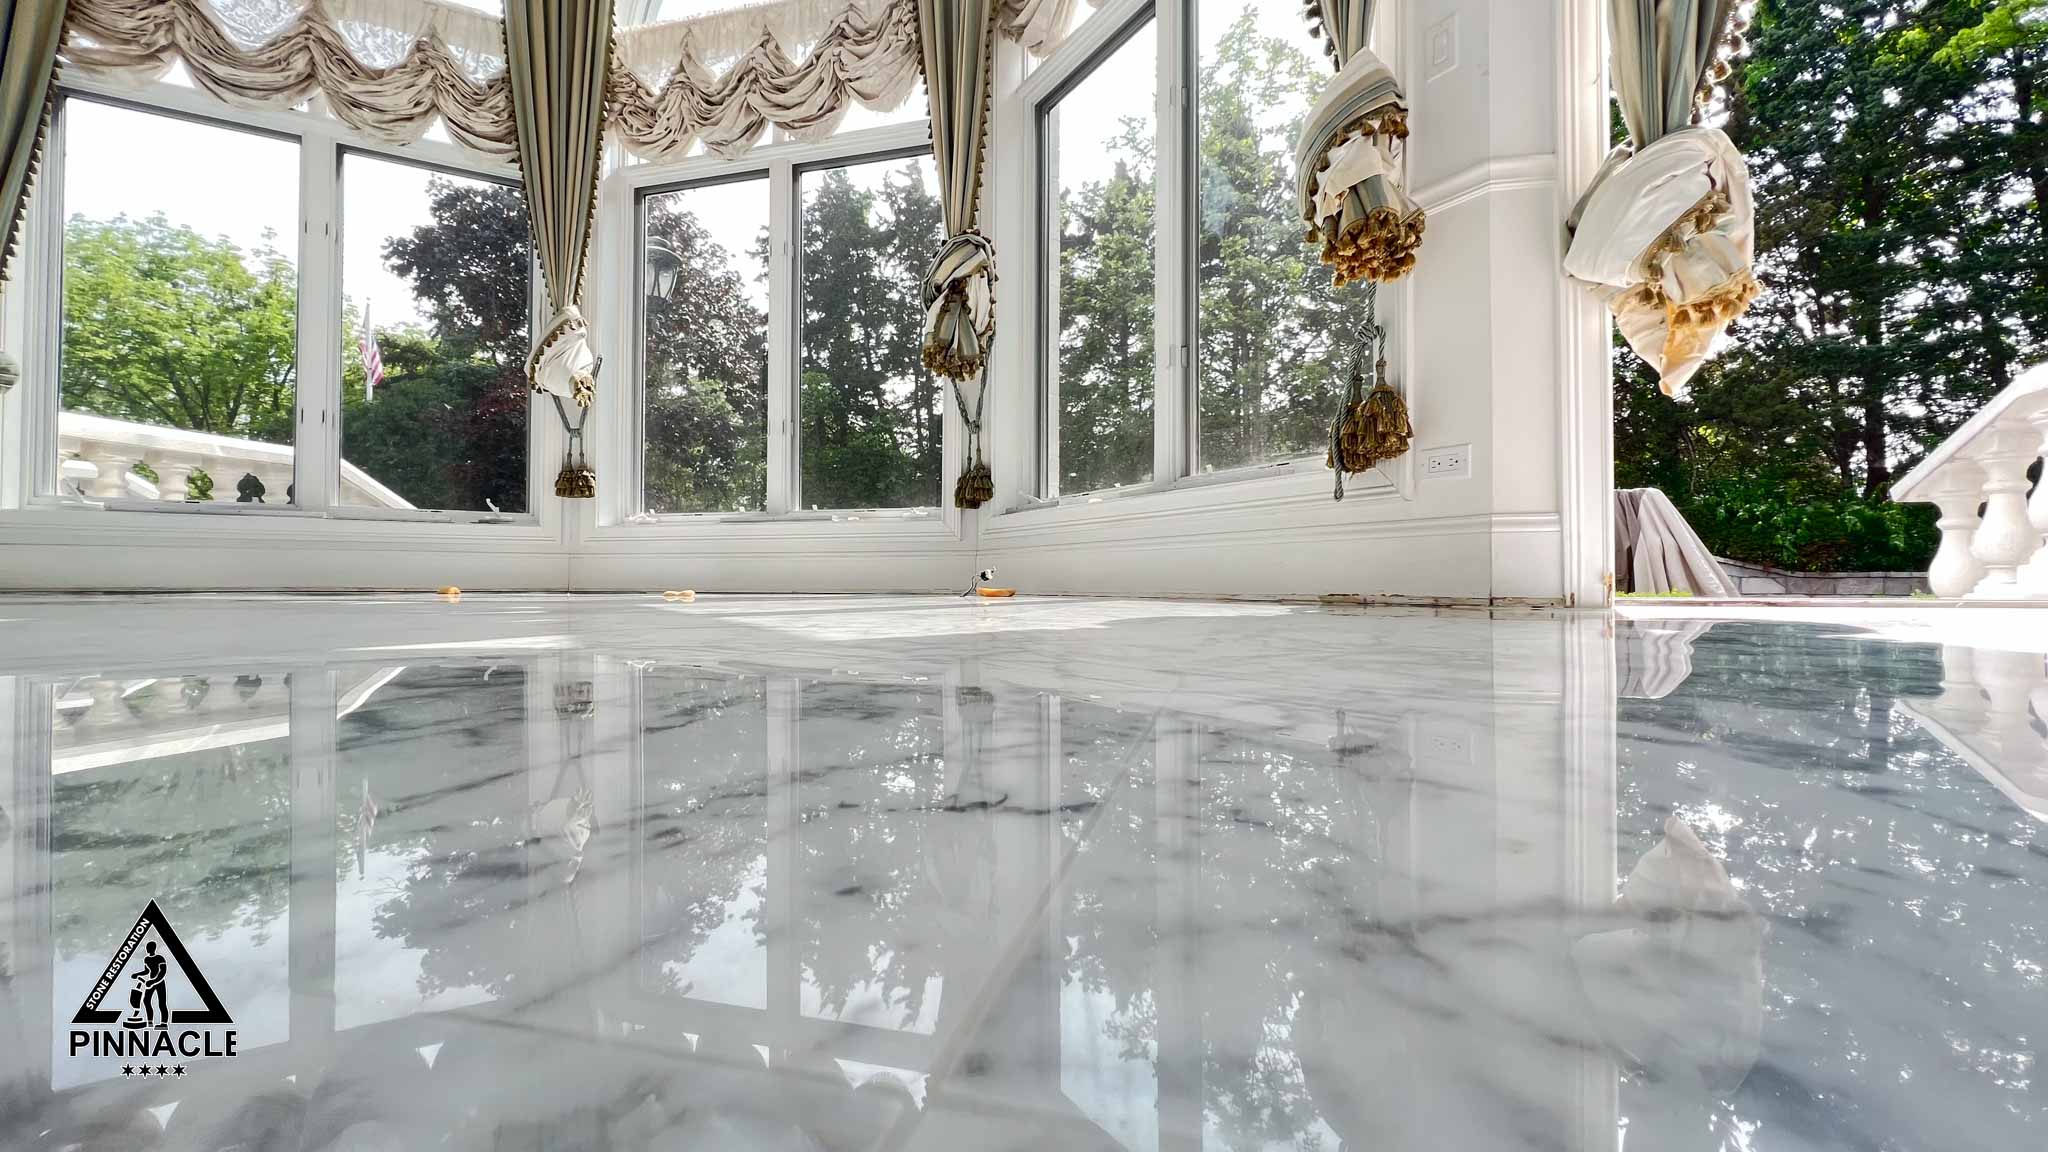 Case study of 8+ steps refinishing system of calacatta gold marble tile floor